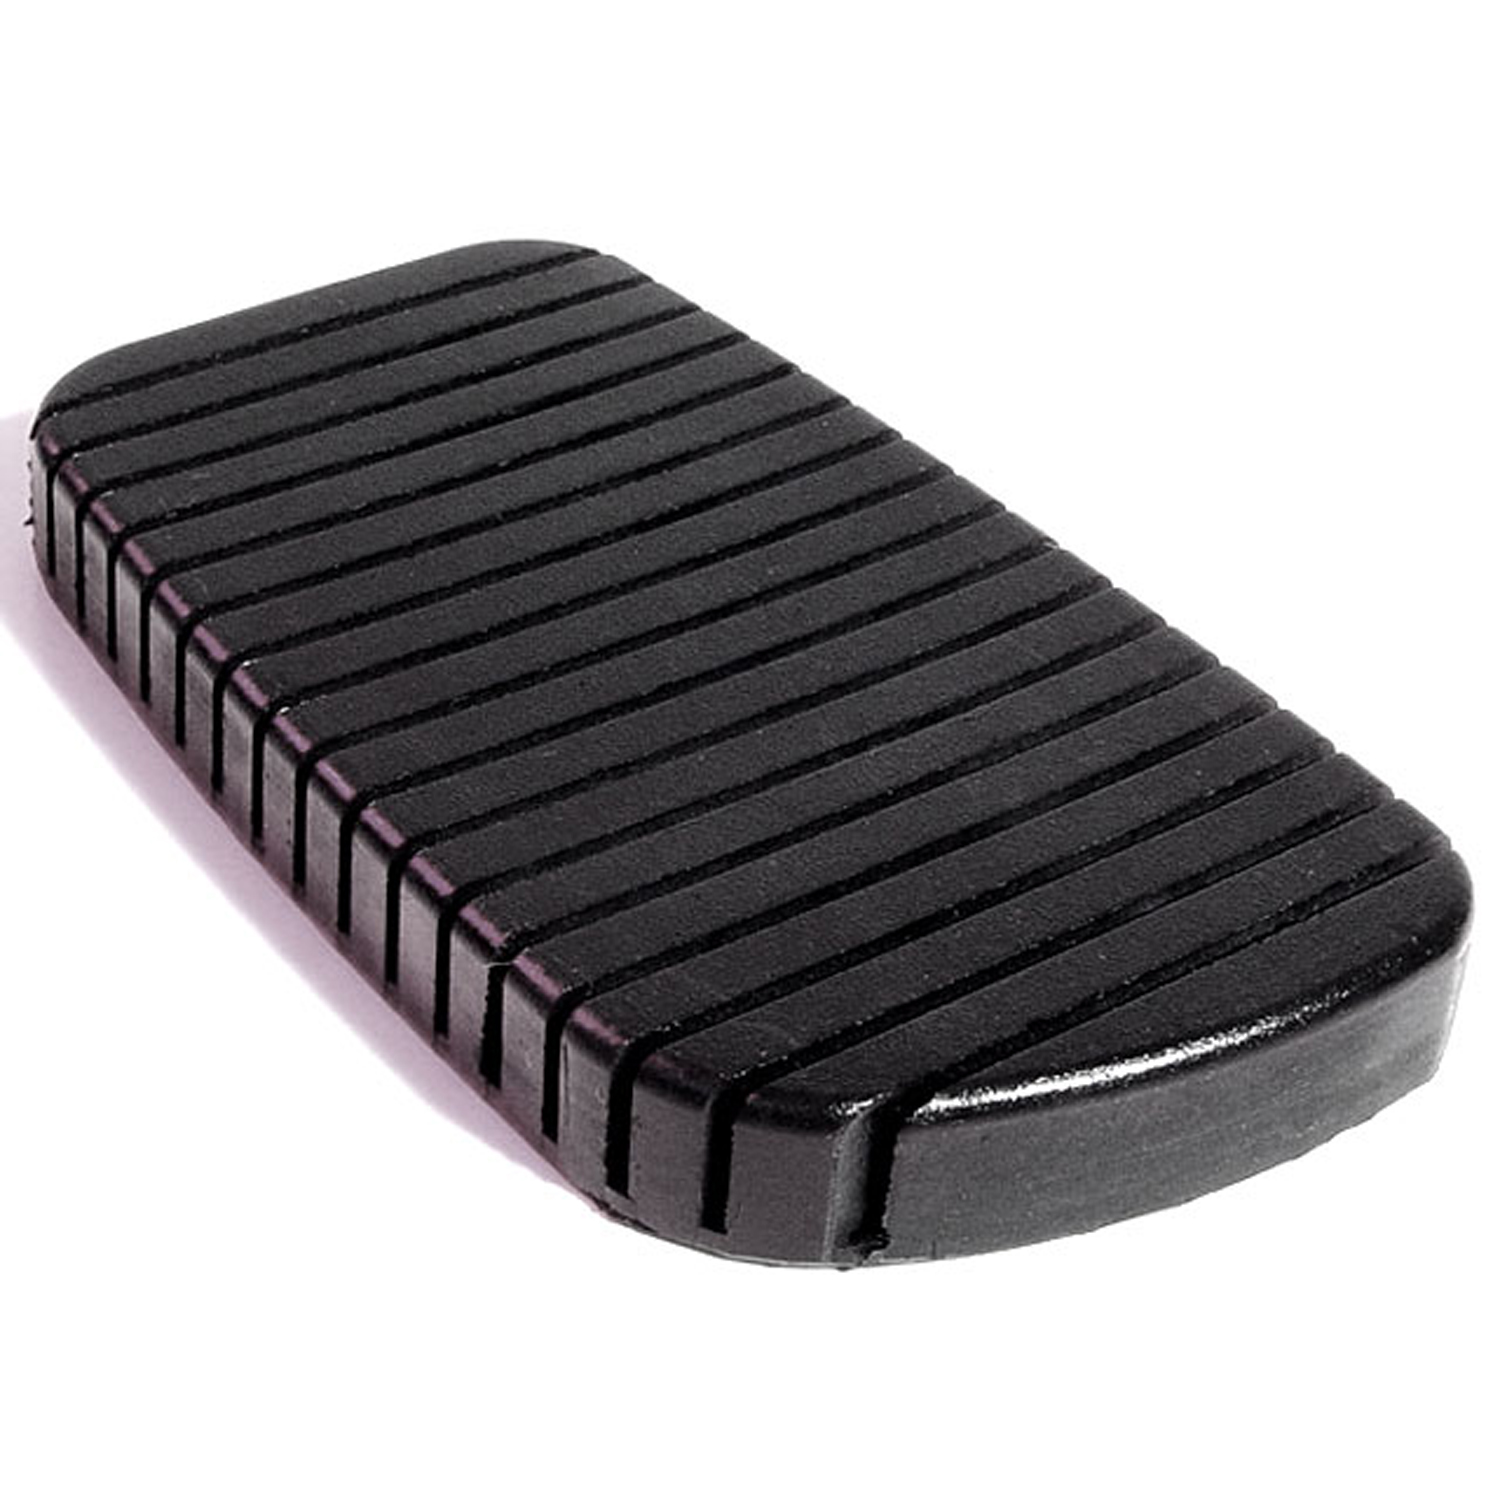 1956 Ford Country Squire Brake Pedal Pad.  Correct reproduction of a difficult part-CB 90-C